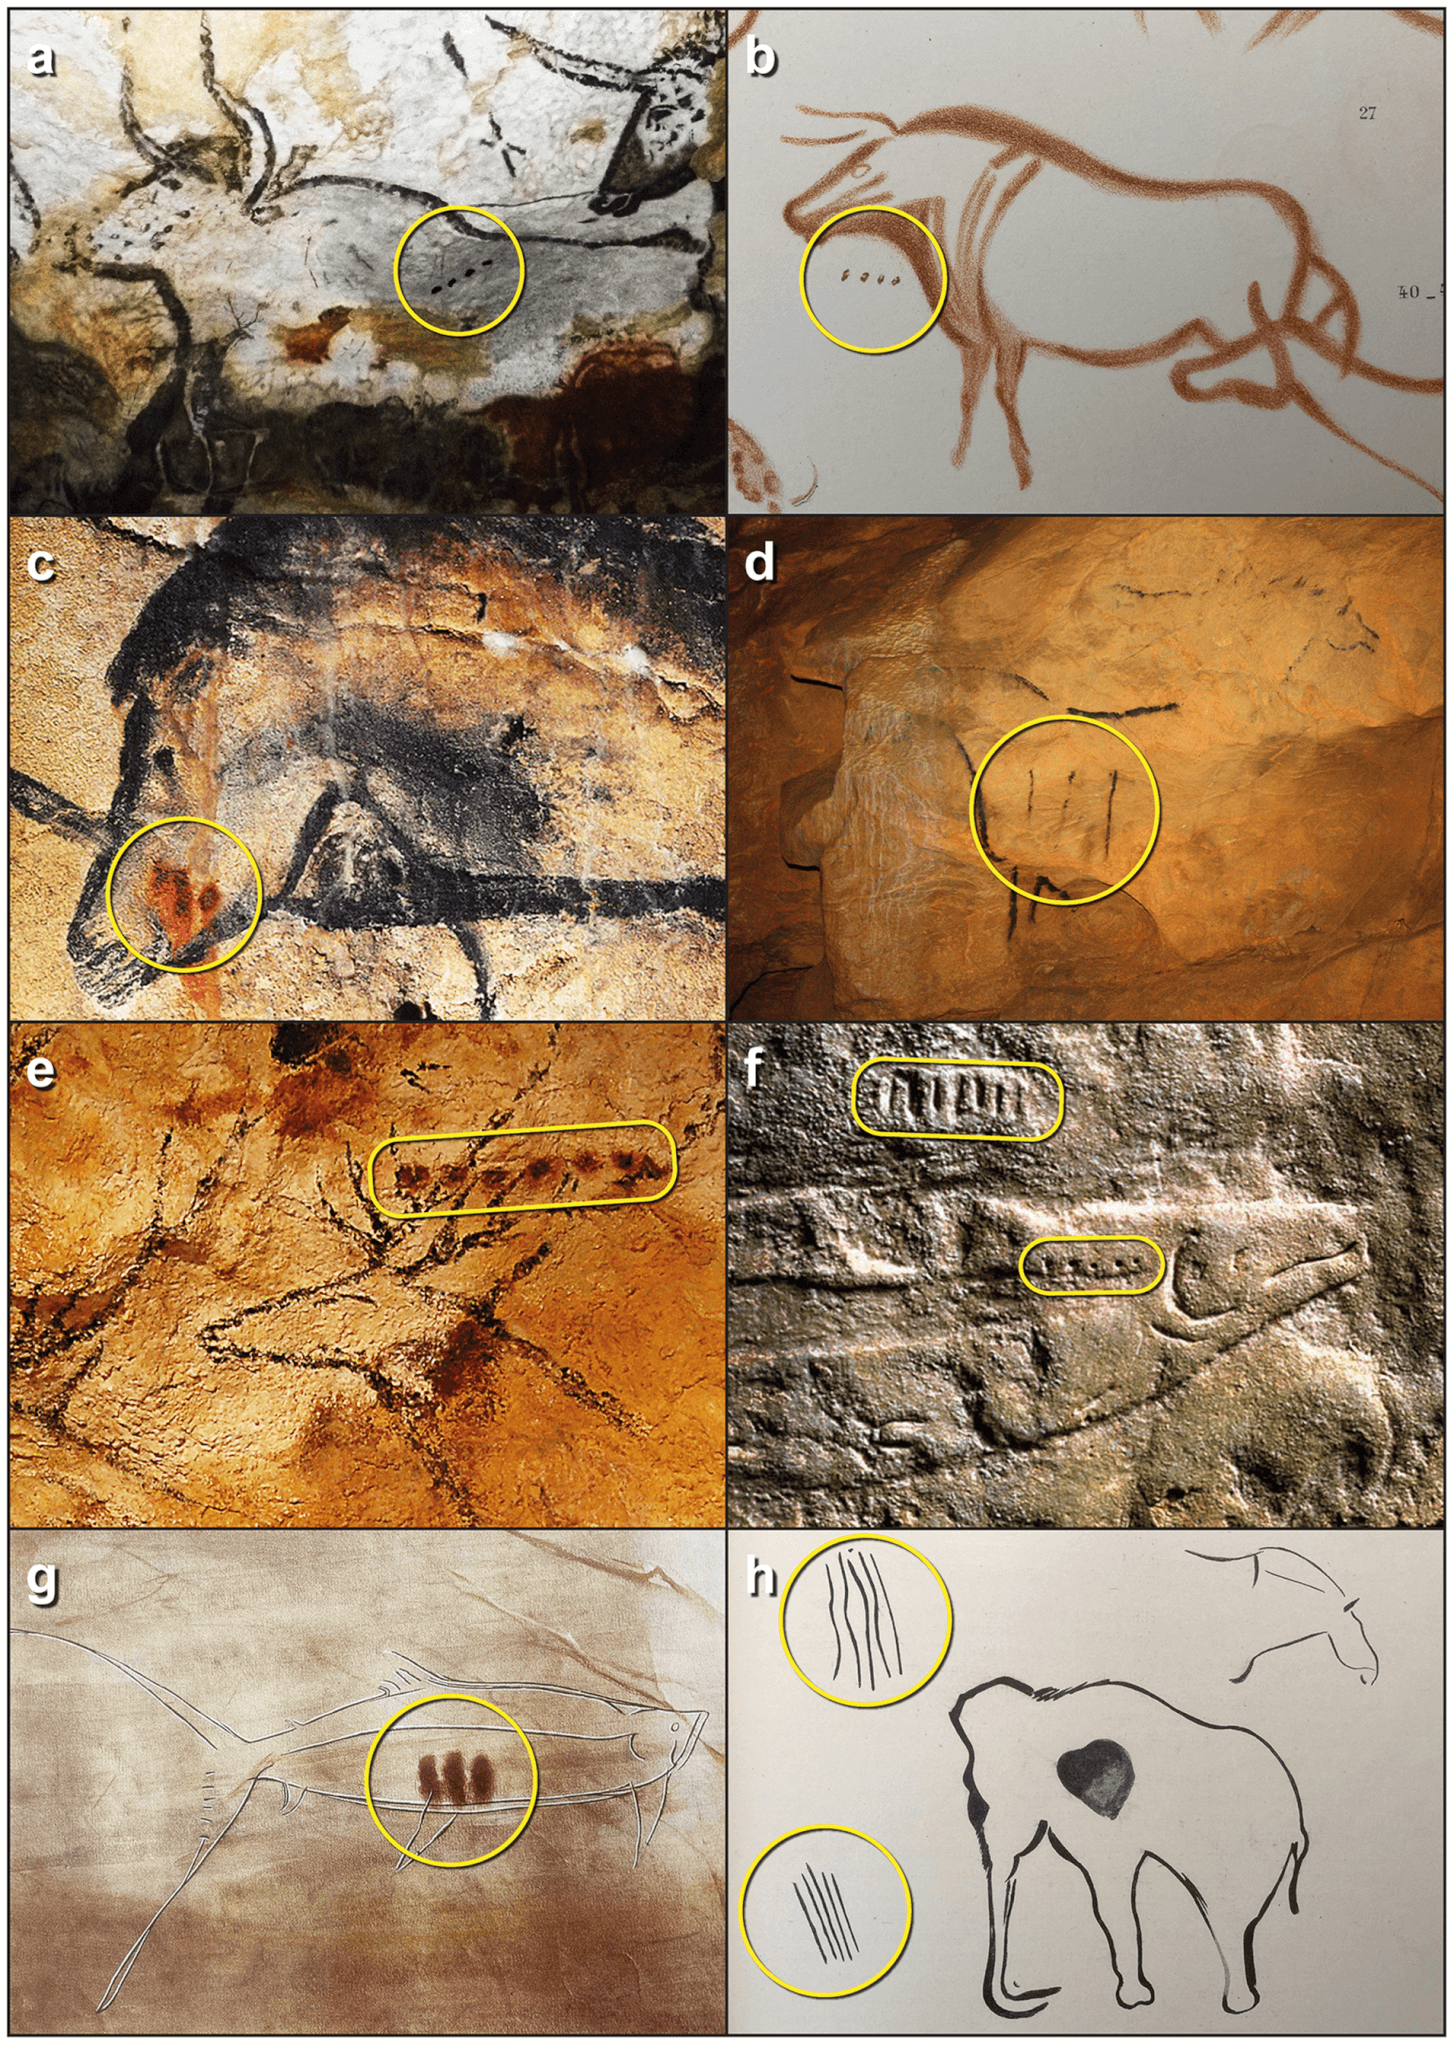 Mysterious markings on ancient cave paintings finally decoded - Study Finds